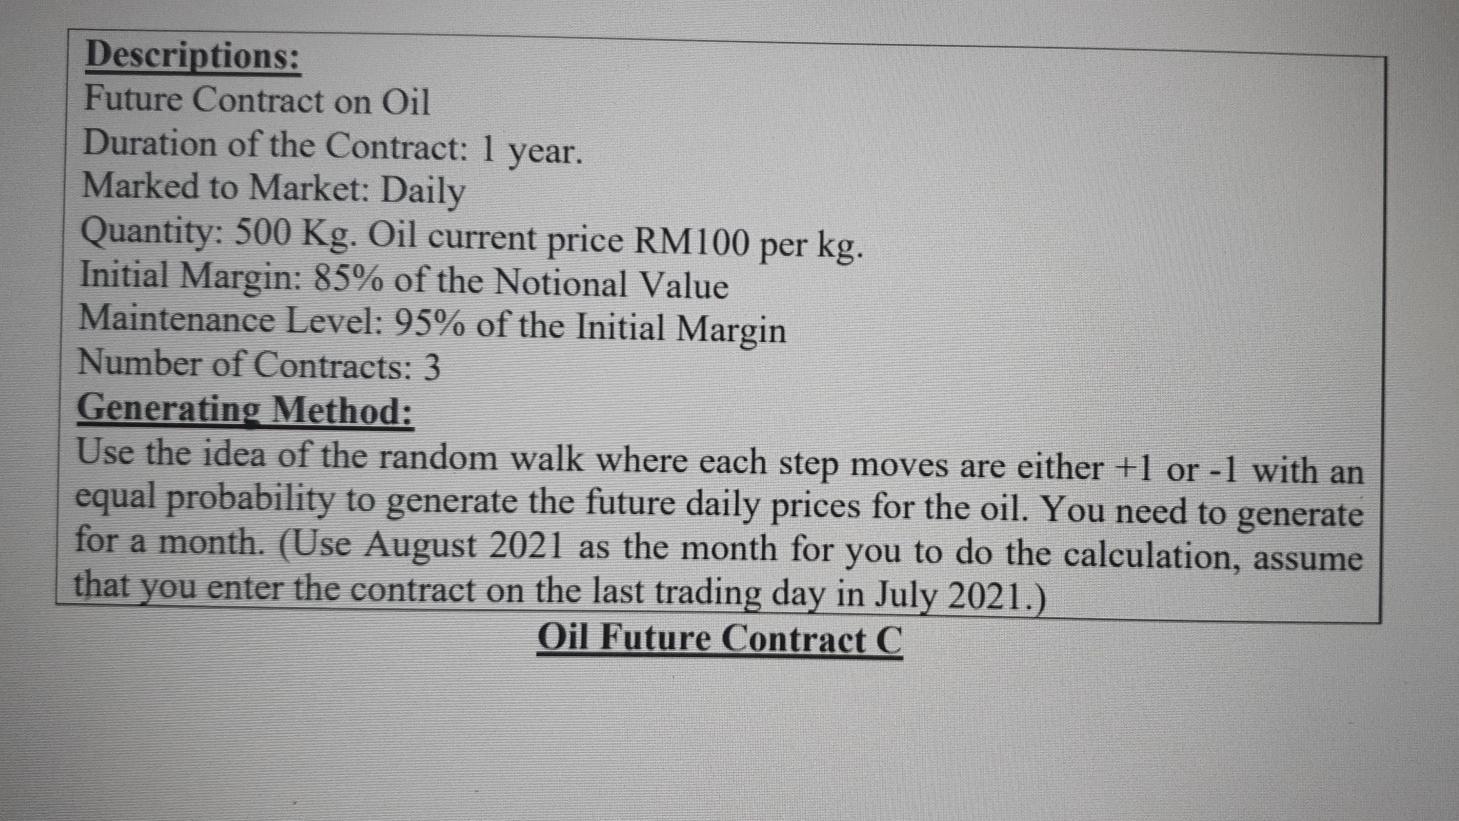 Descriptions: Future Contract on Oil Duration of the Contract: 1 year. Marked to Market: Daily Quantity: 500 Kg. Oil current